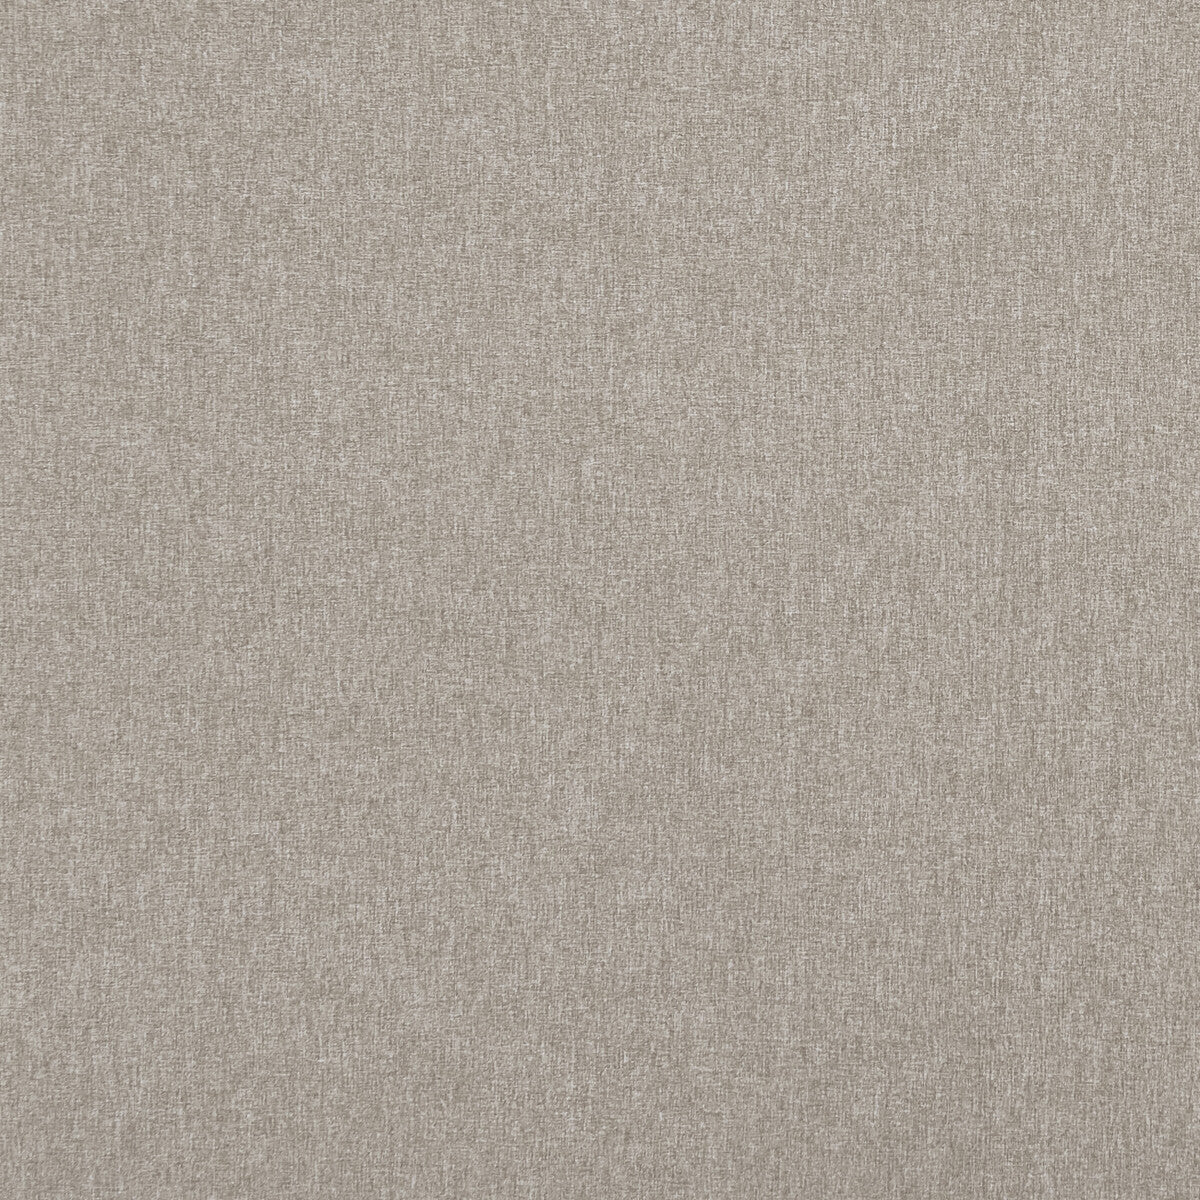 Highlander fabric in mink color - pattern F0848/57.CAC.0 - by Clarke And Clarke in the Clarke &amp; Clarke Highlander 2 collection